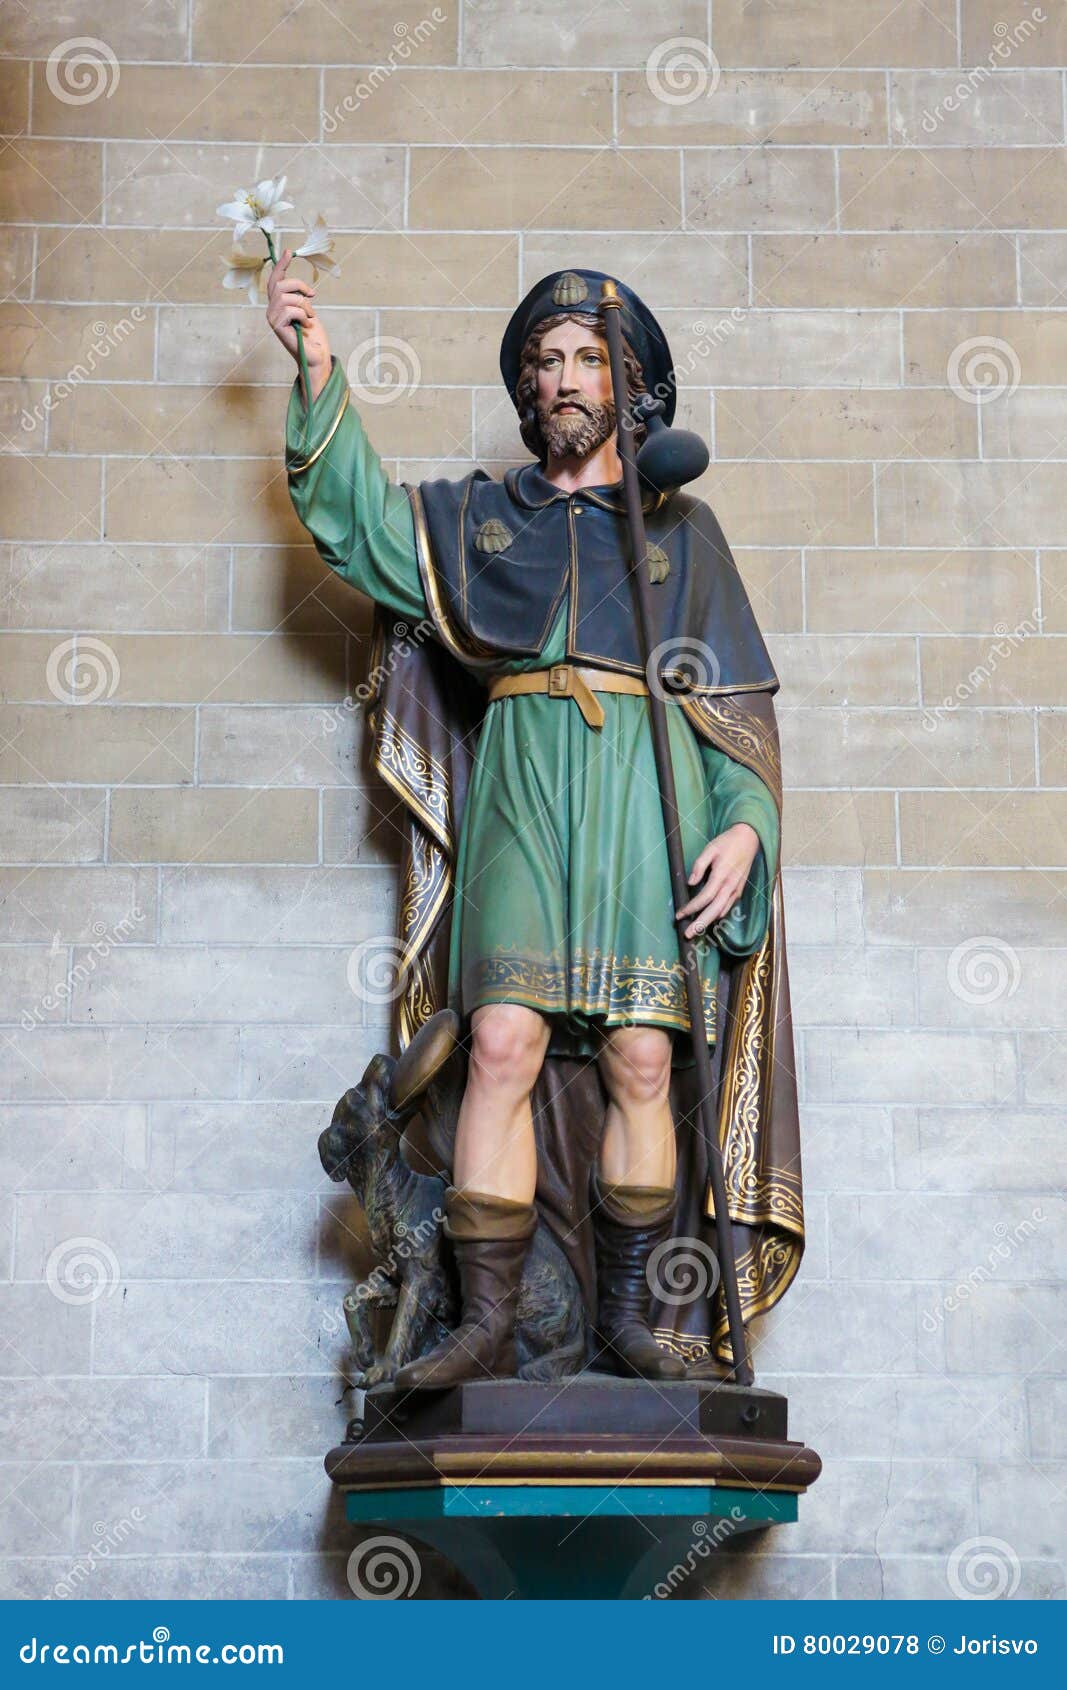 saint james the greater - statue in mechelen cathedral